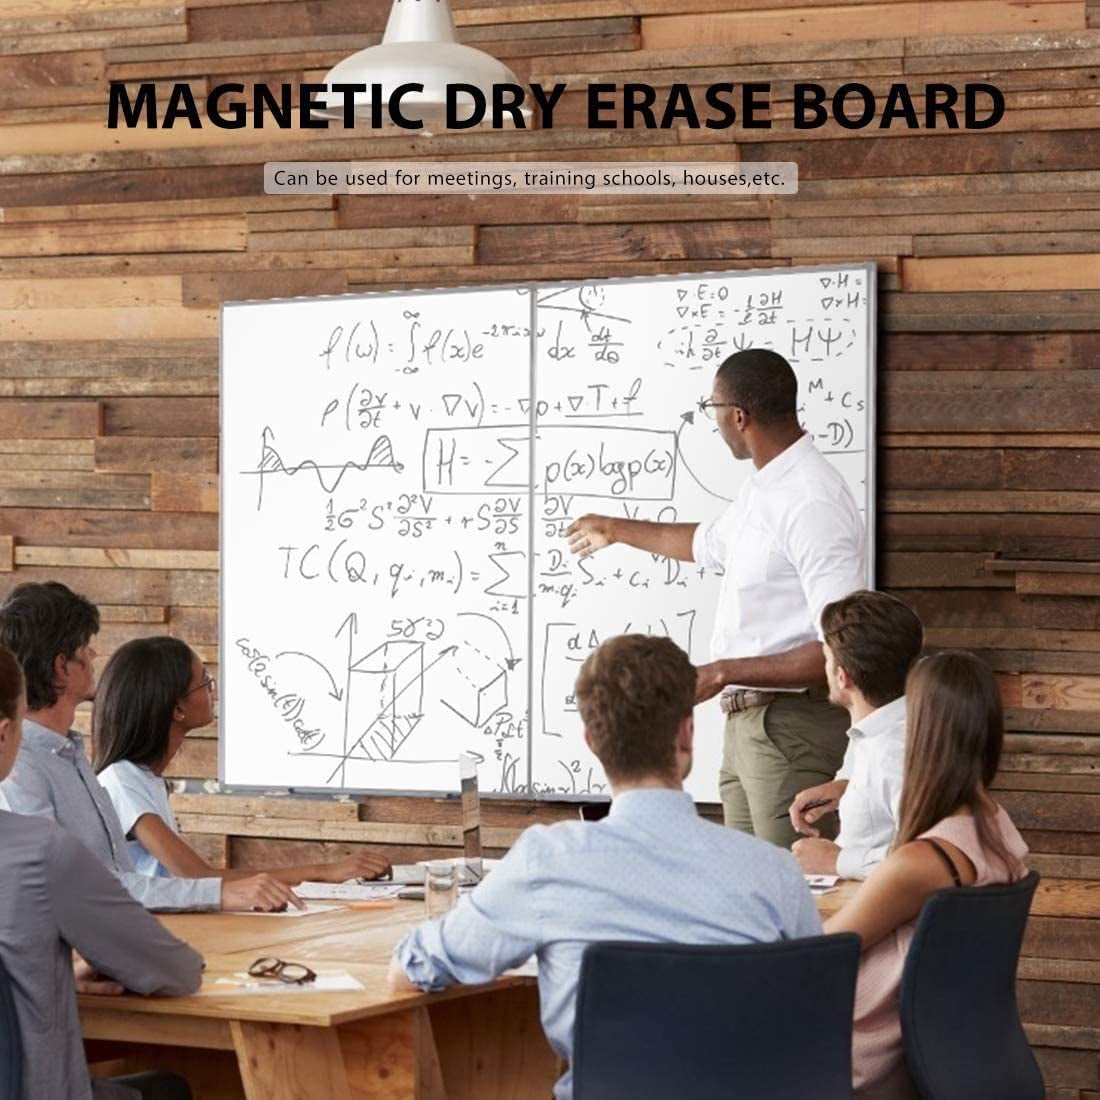 Wall Mounted Whiteboard XIWODE Magnetic Dry Erase Board 36 x 24 Inch Erase Board Silver Aluminium Framed with Lacquered Steel Surface，90 x 60 cm Lightweight White Board